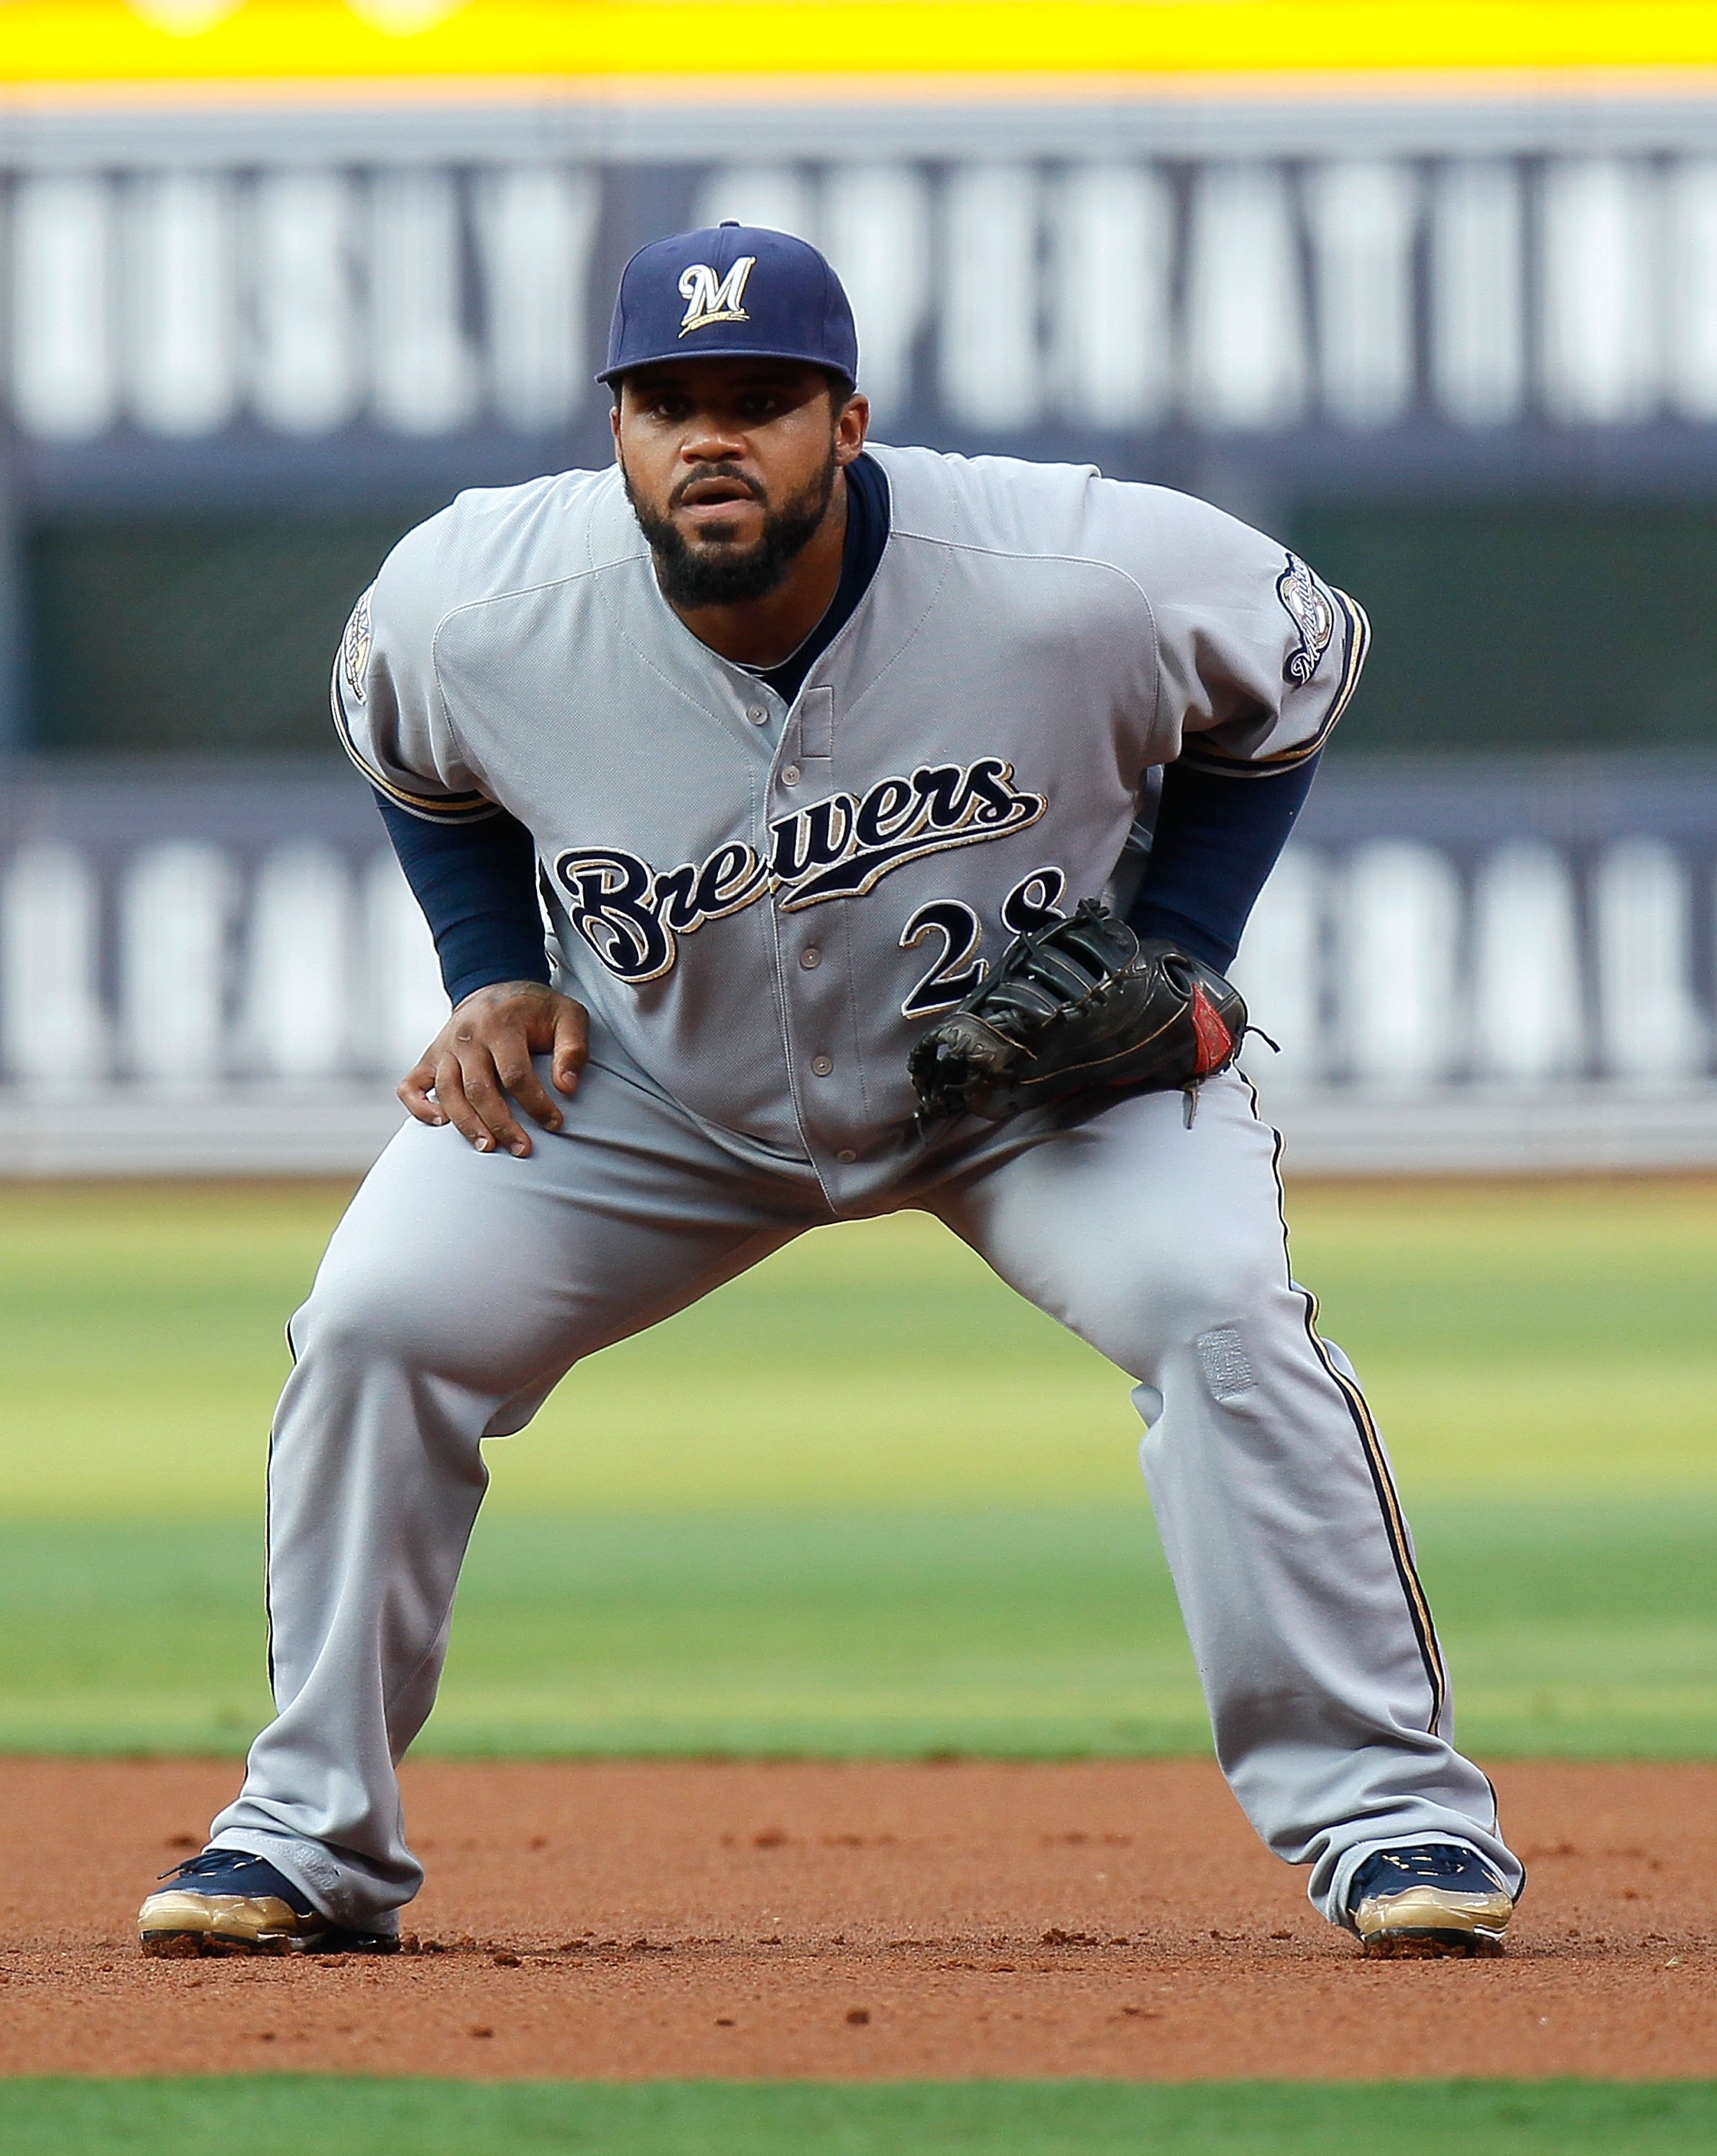 Minnesota Twins: Rating Their Chances of Landing Prince Fielder or